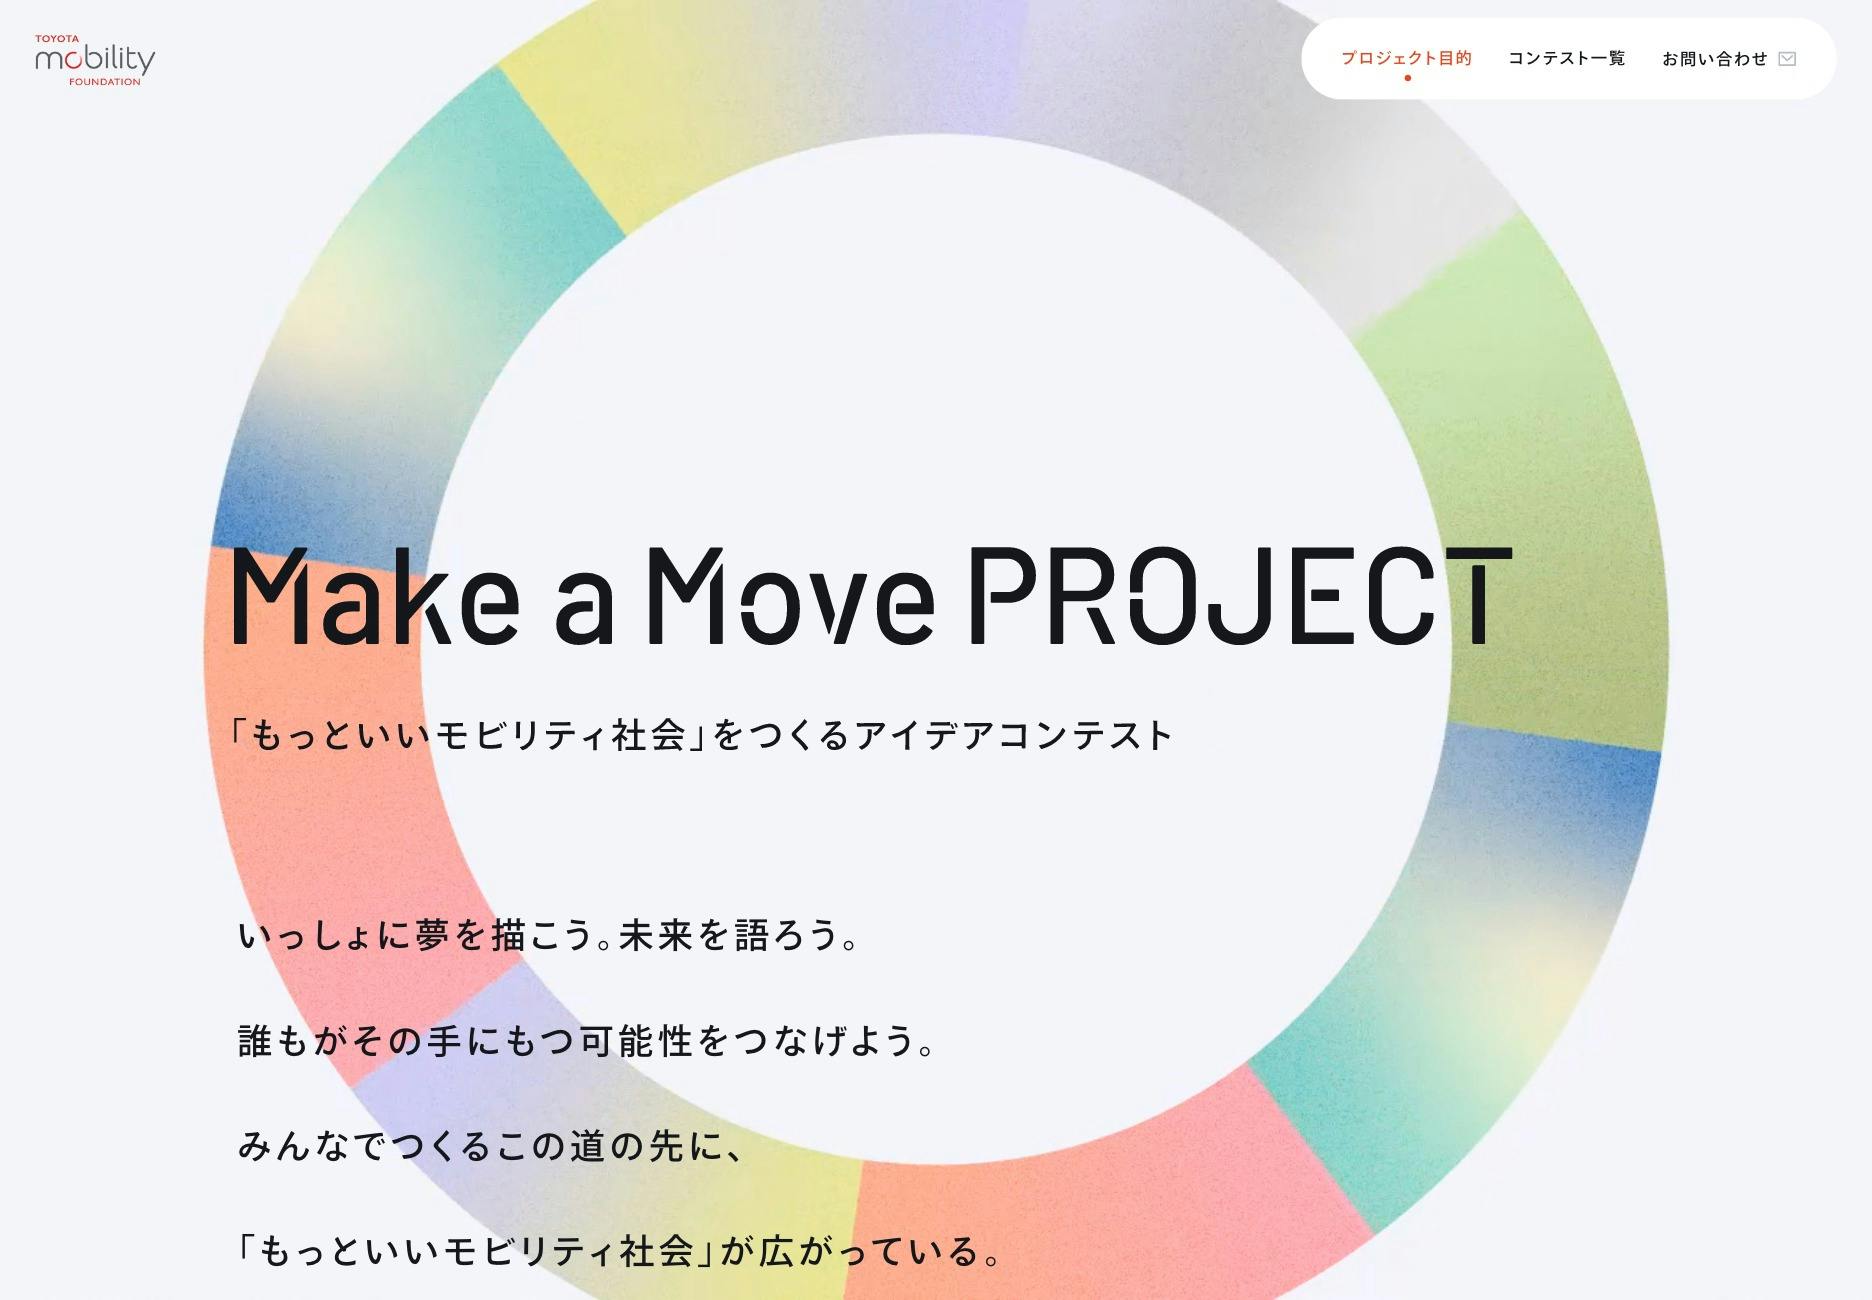 Cover Image for Make a Move PROJECT – 「もっといいモビリティ社会」をつくるアイデアコンテスト | トヨタ・モビリティ基金